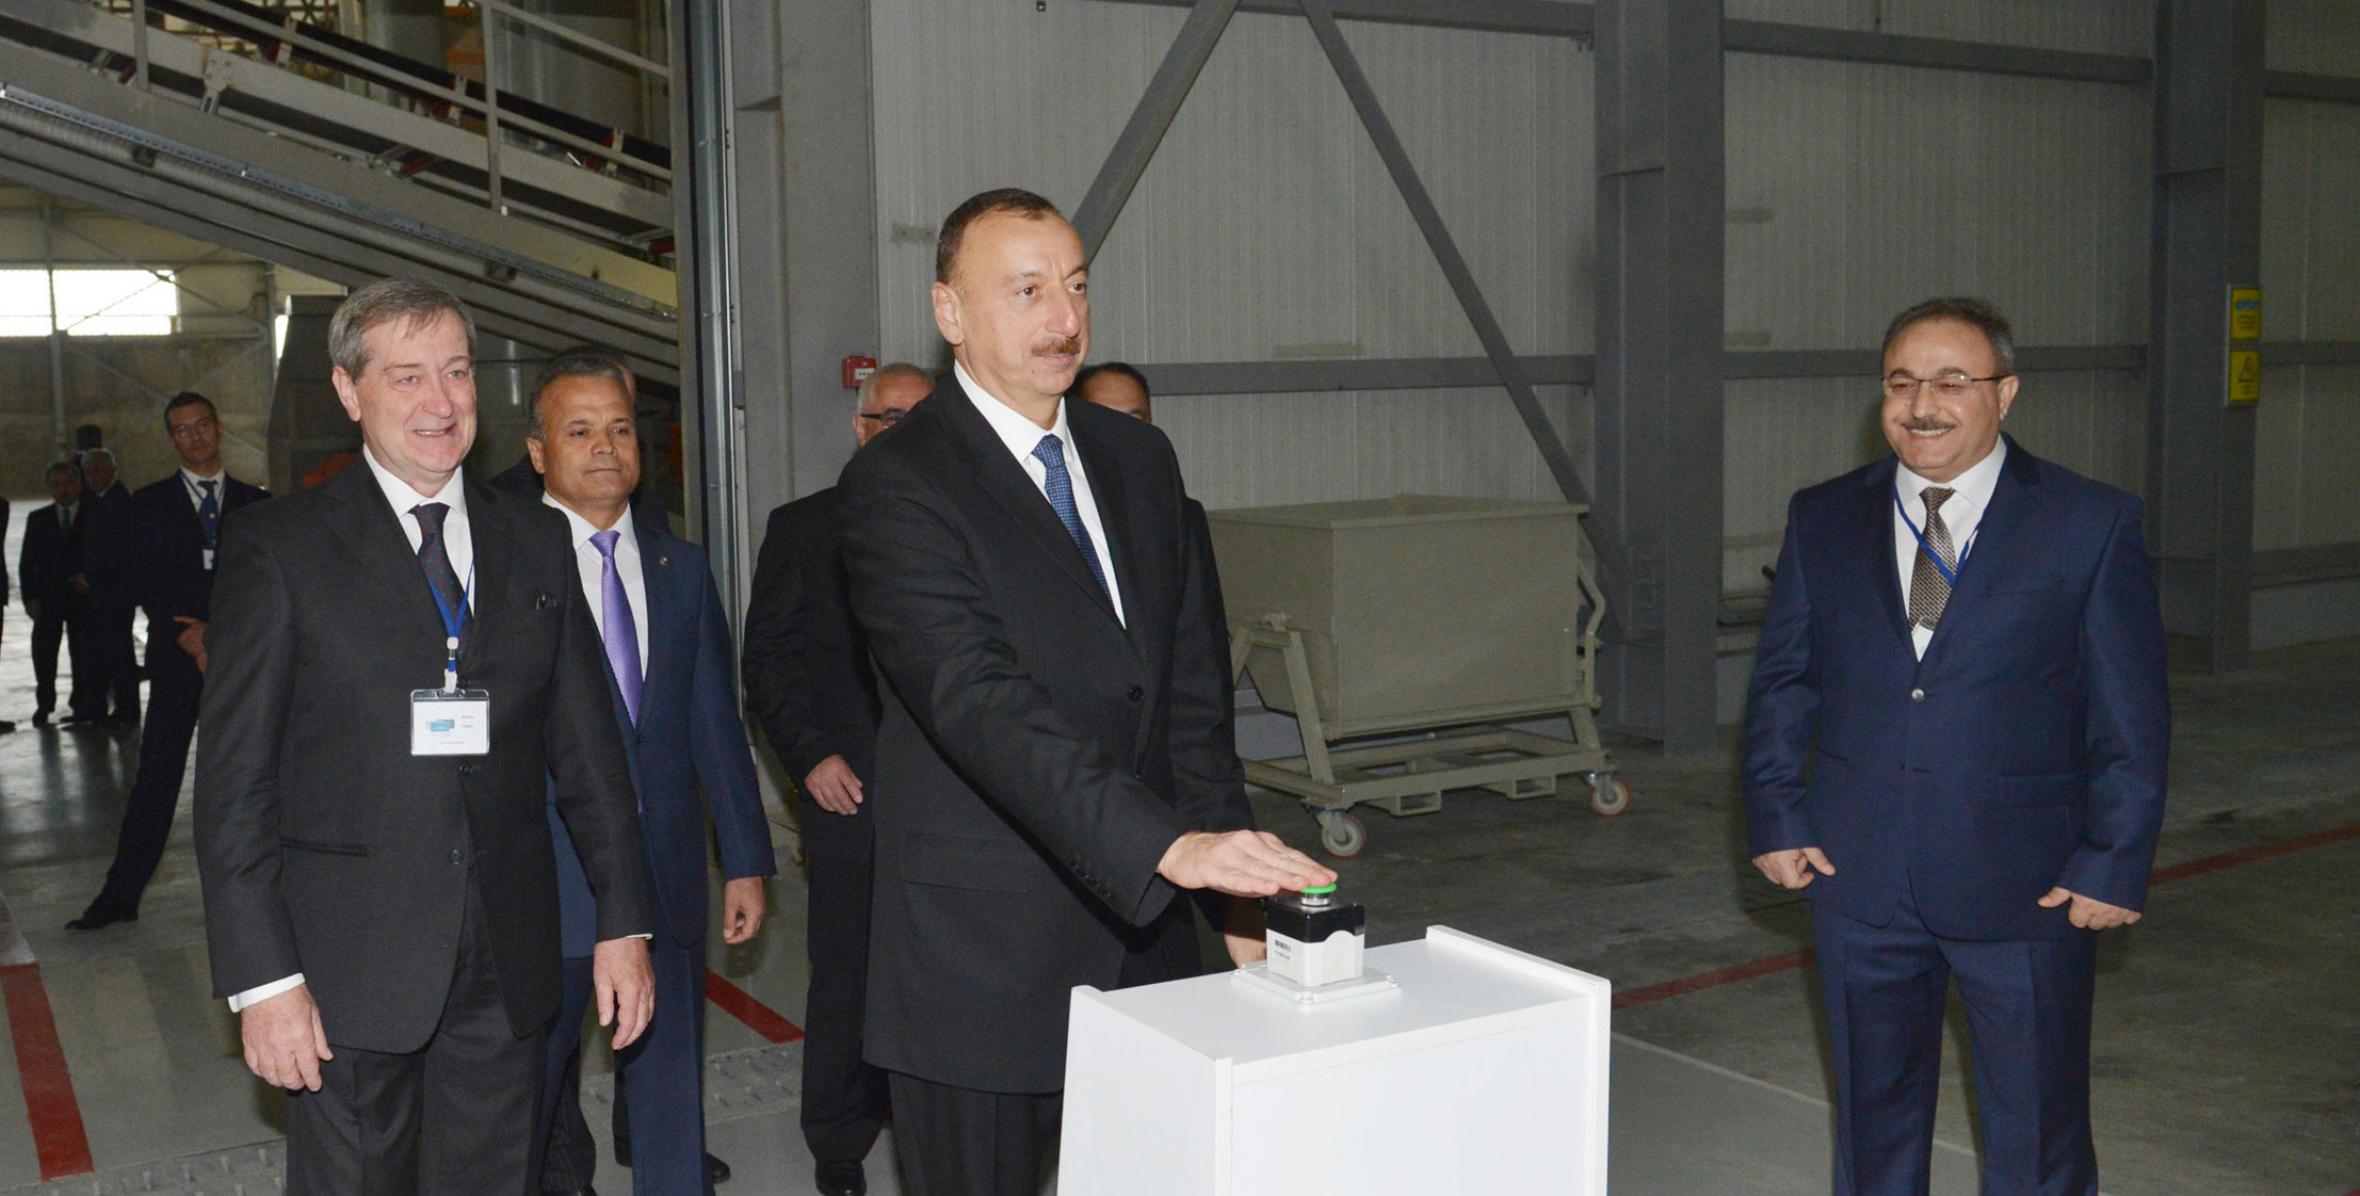 Ilham Aliyev attended the opening ceremony of a plant to produce ceramic slabs at the Gilan Seramik Park